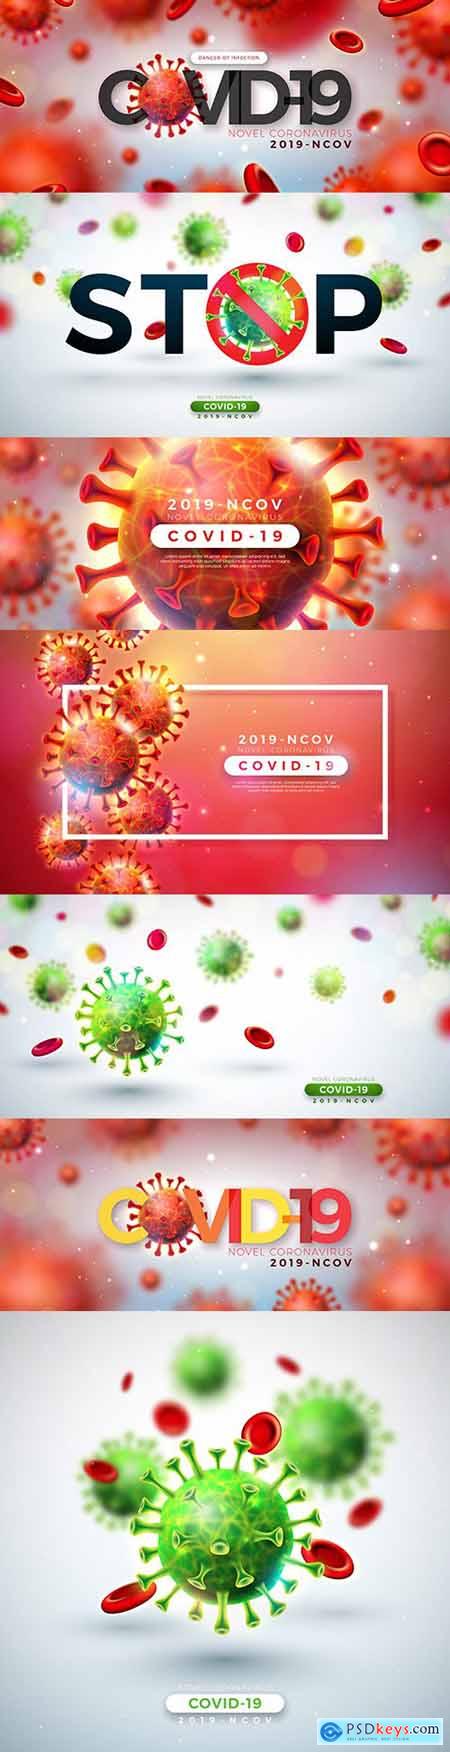 Covid-19 coronavirus with falling viruses and cells